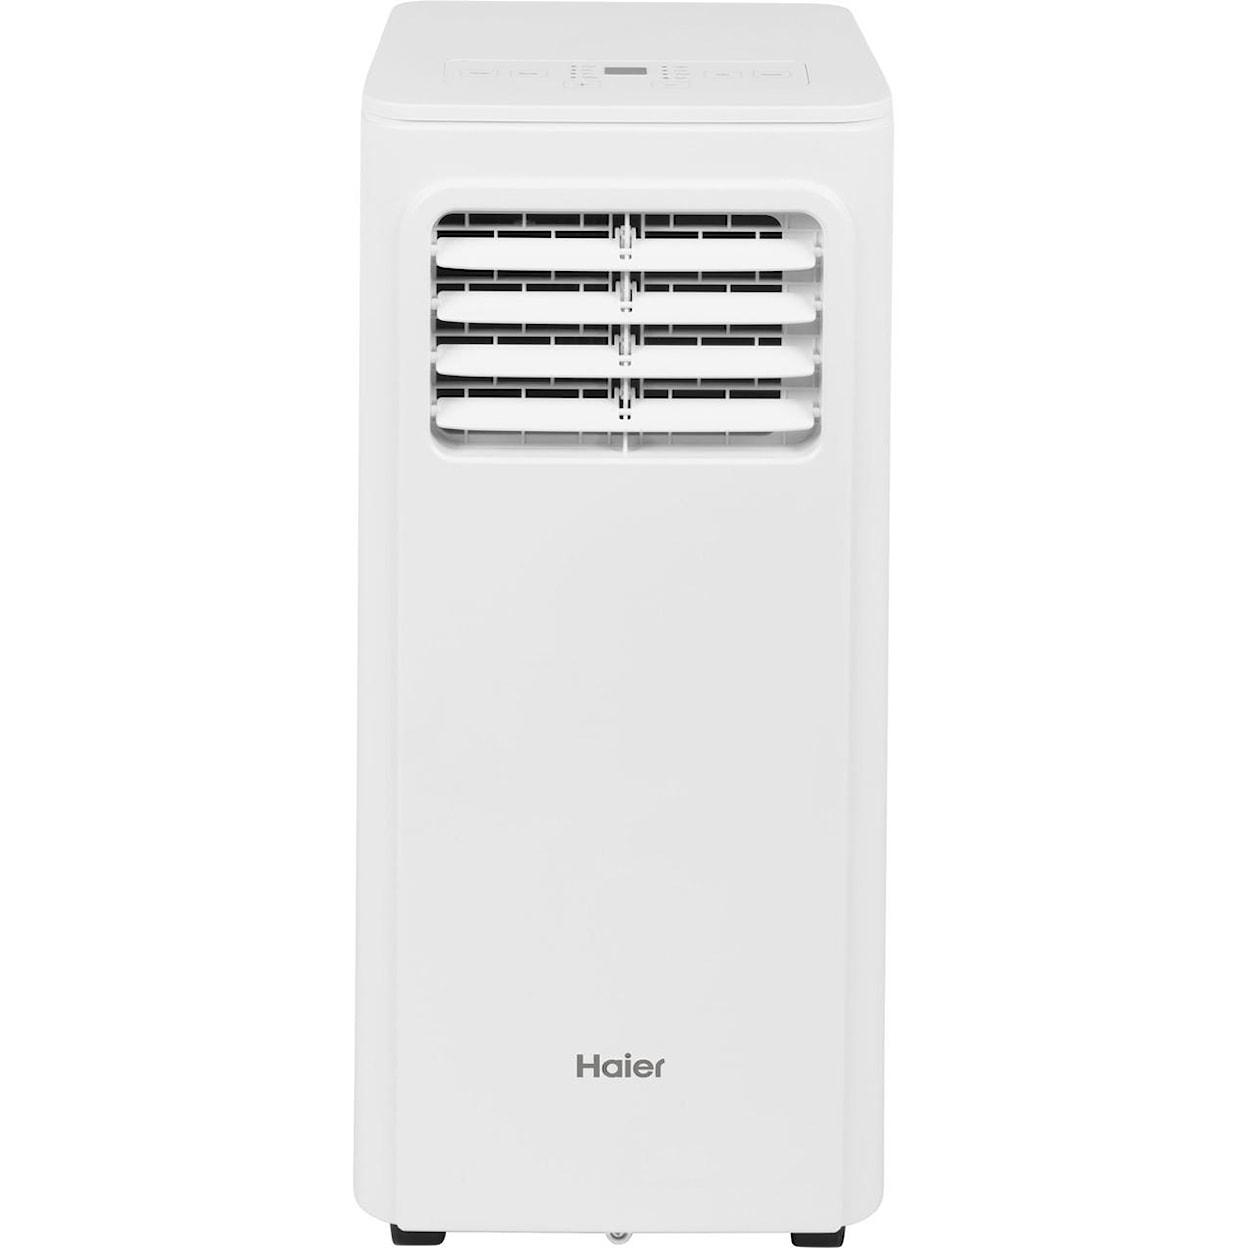 Haier Appliances Air Conditioners Portable Air Conditioner